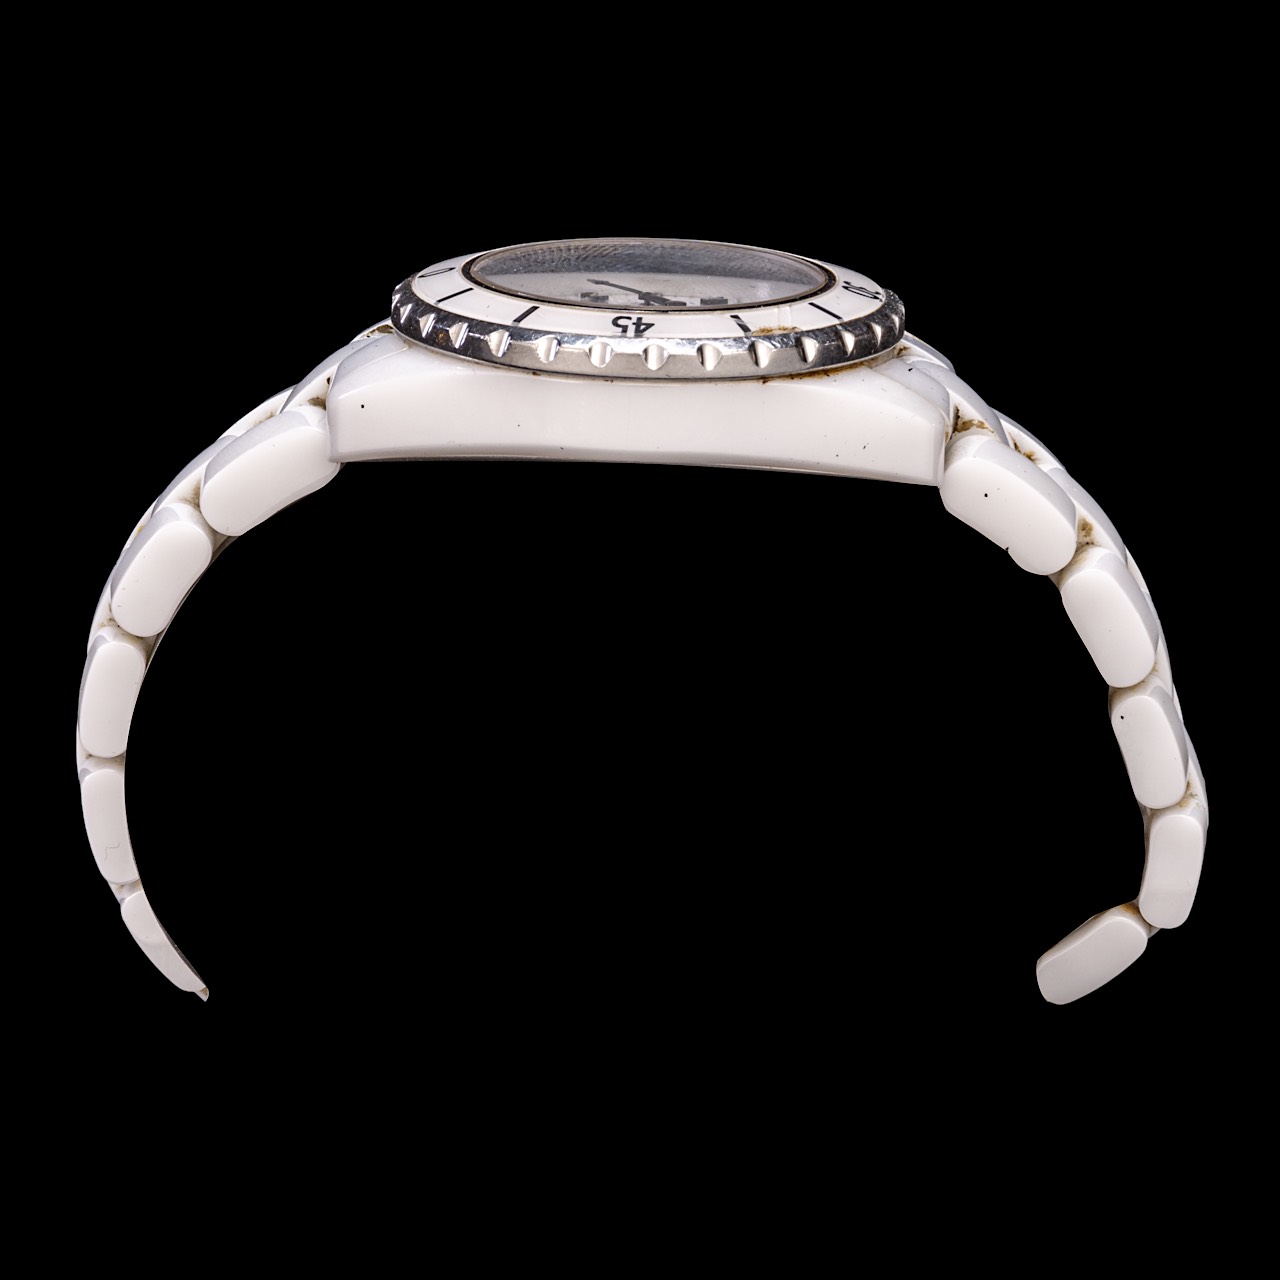 Chanel J12 Watch, white ceramic and steel, 33 mm, Ref. H5698 - Image 5 of 12